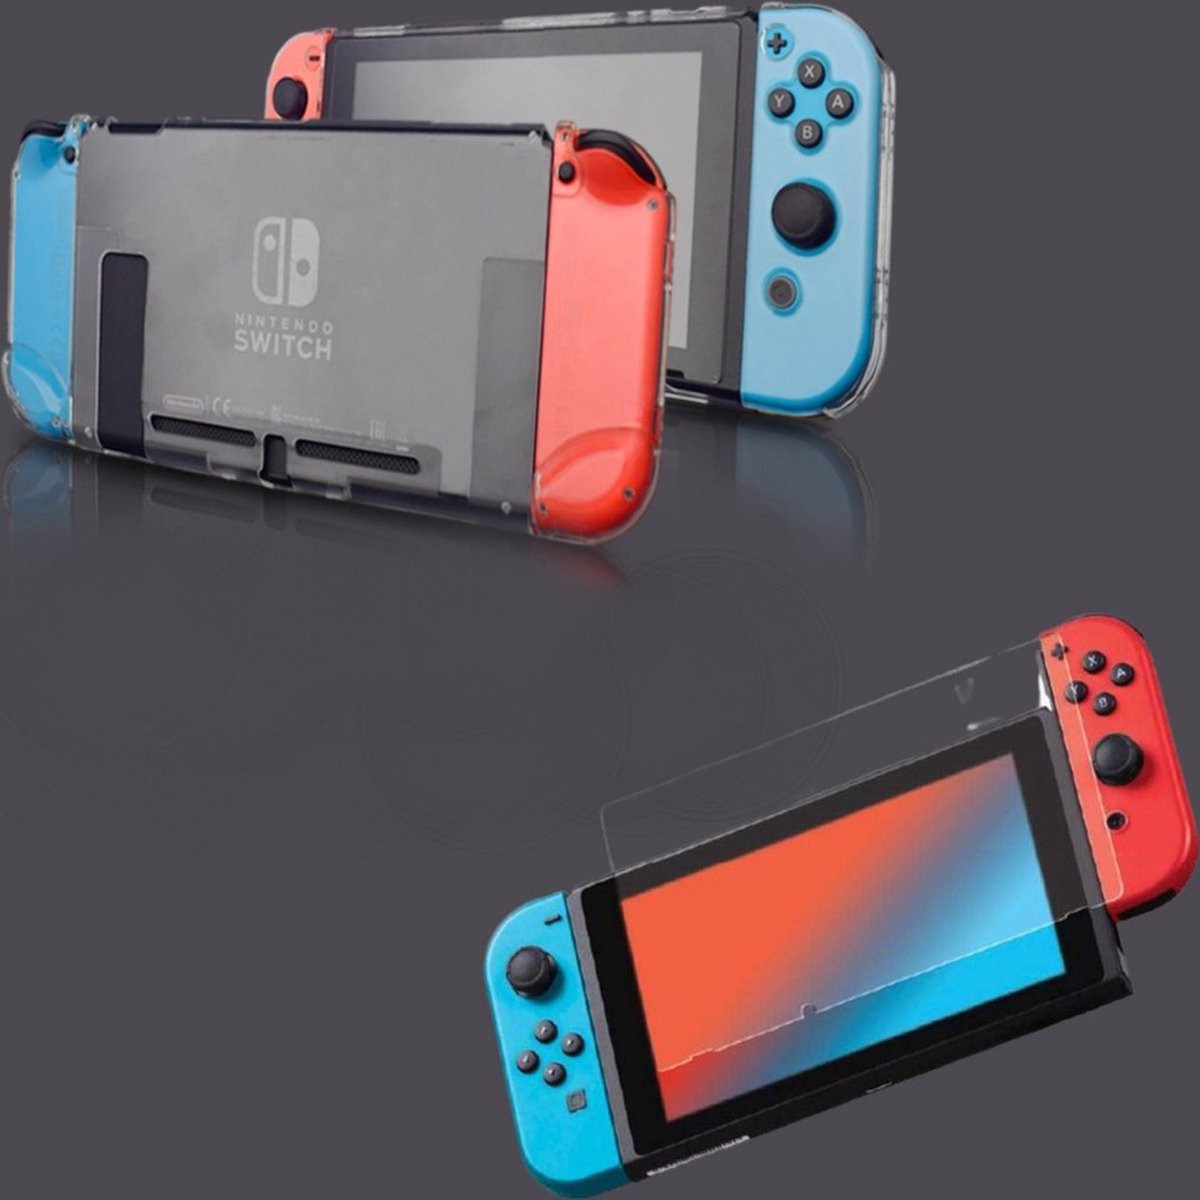 Nintendo Switch TPU case - Nintendo Switch screenprotector - clear case - screen protector Tempered - TPU - case en screenprotector voor Nintendo Switch - Cicon